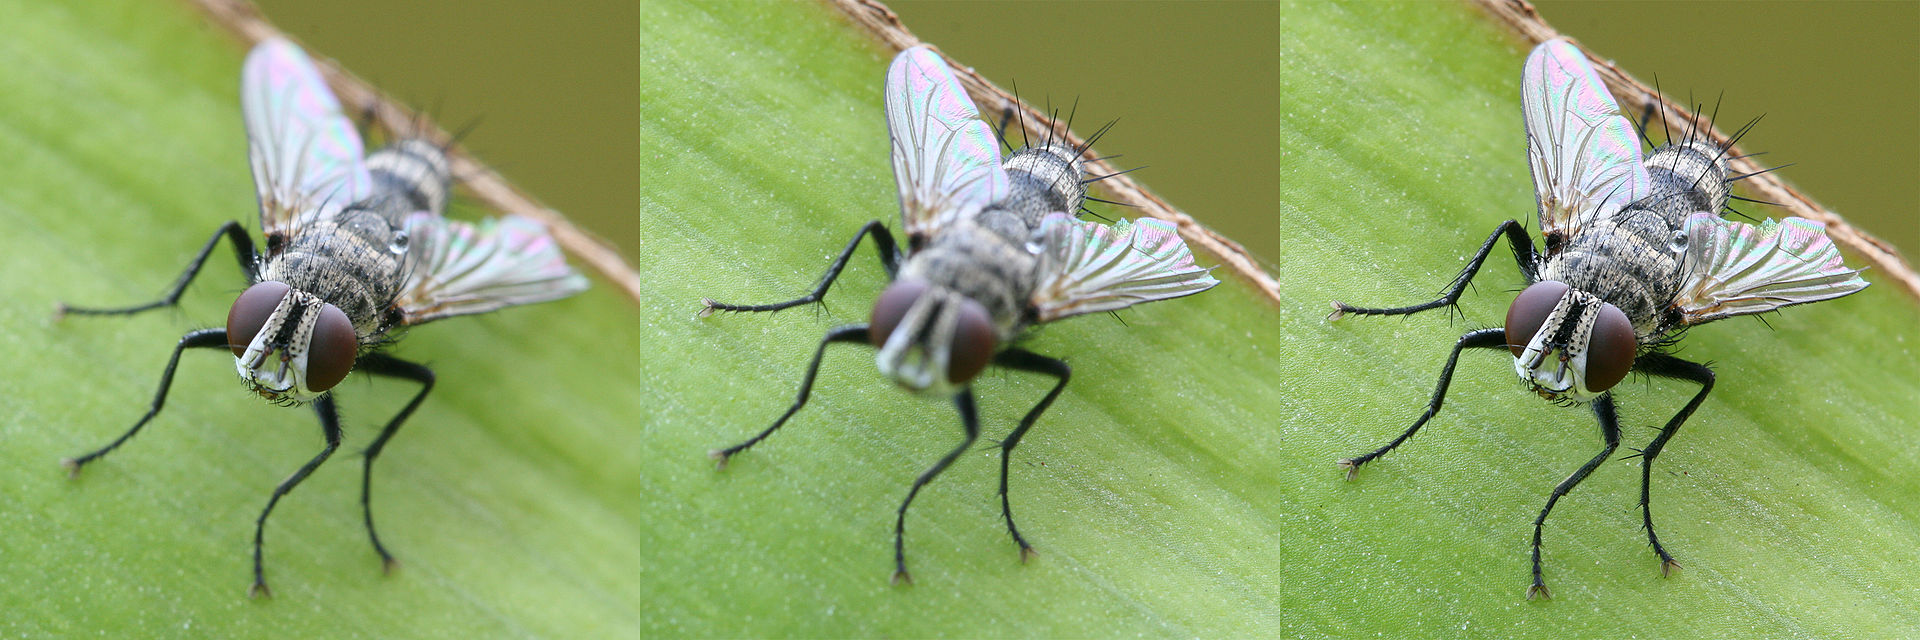 Fly shot under different Depth of Field settings